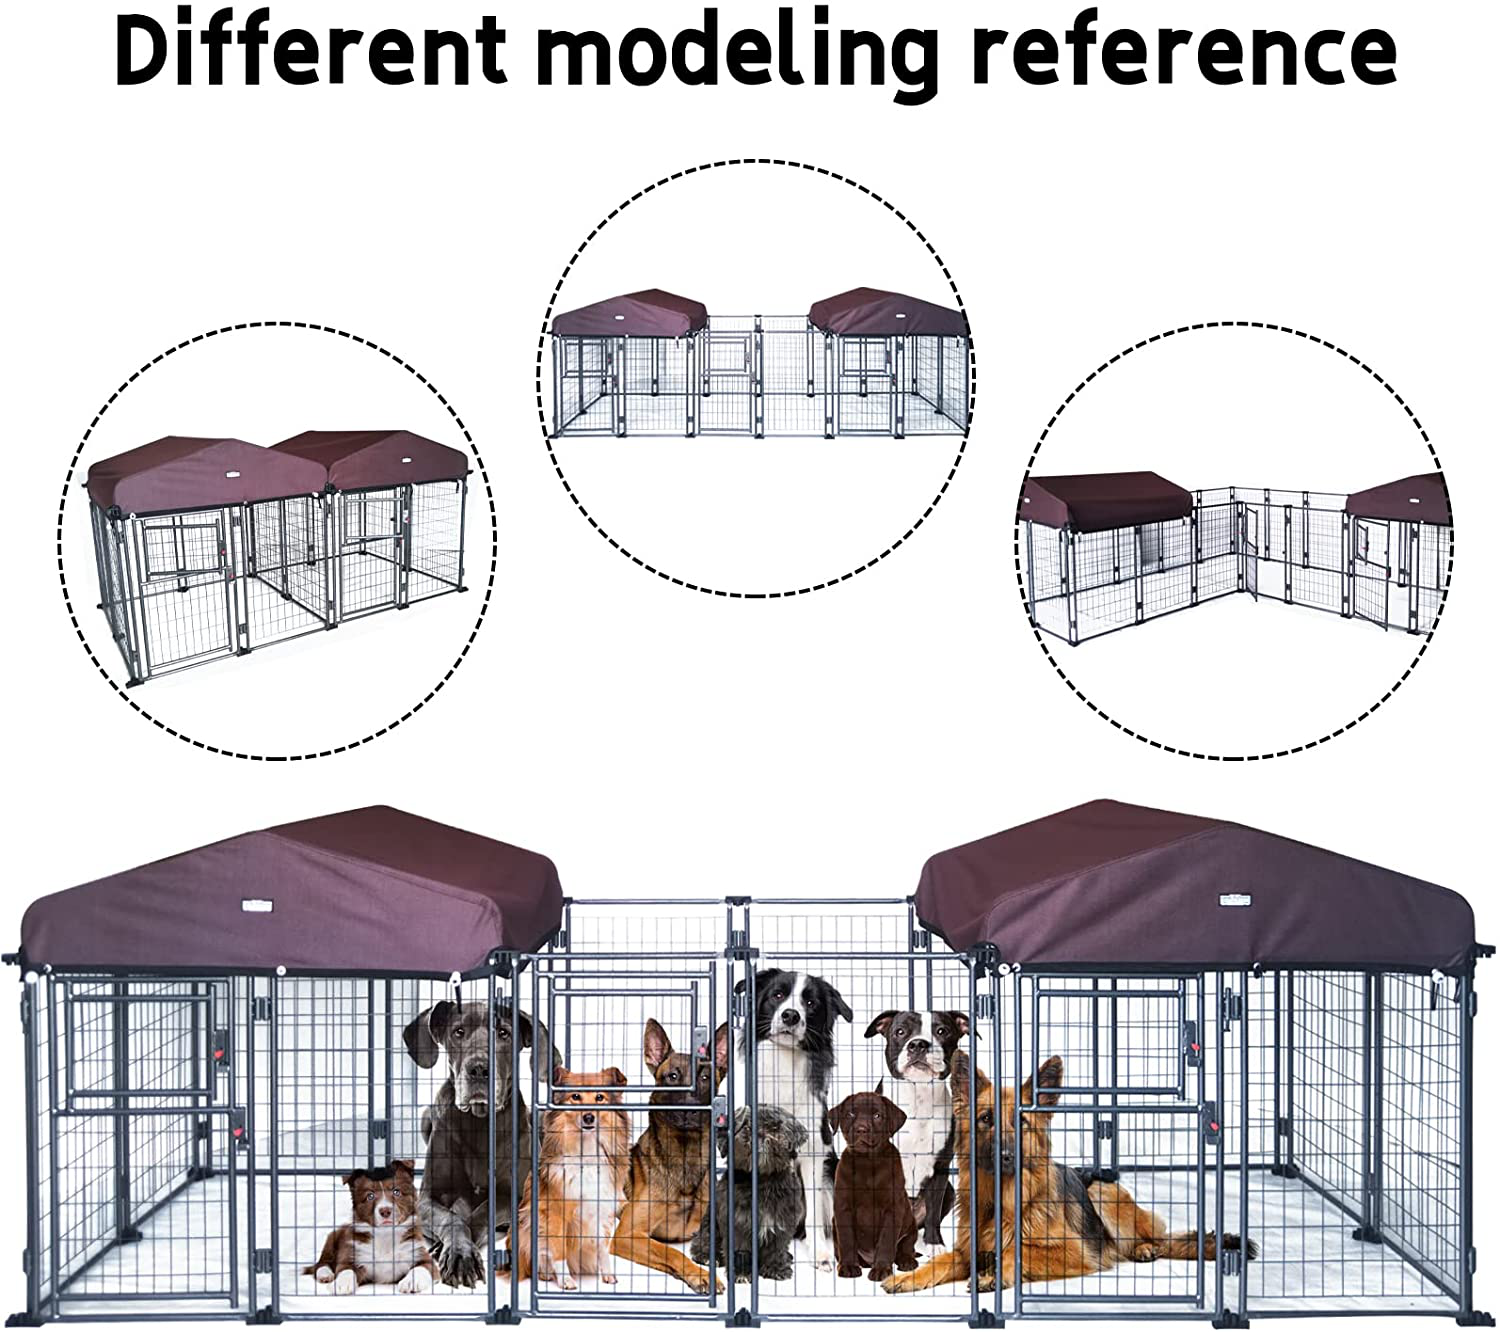 My Pet Companion Dog Kennel Outdoor with Roof Cover Heavy Duty Dog Crates for Medium Dogs Playpen Fence Steel Wire Panel for Backyard